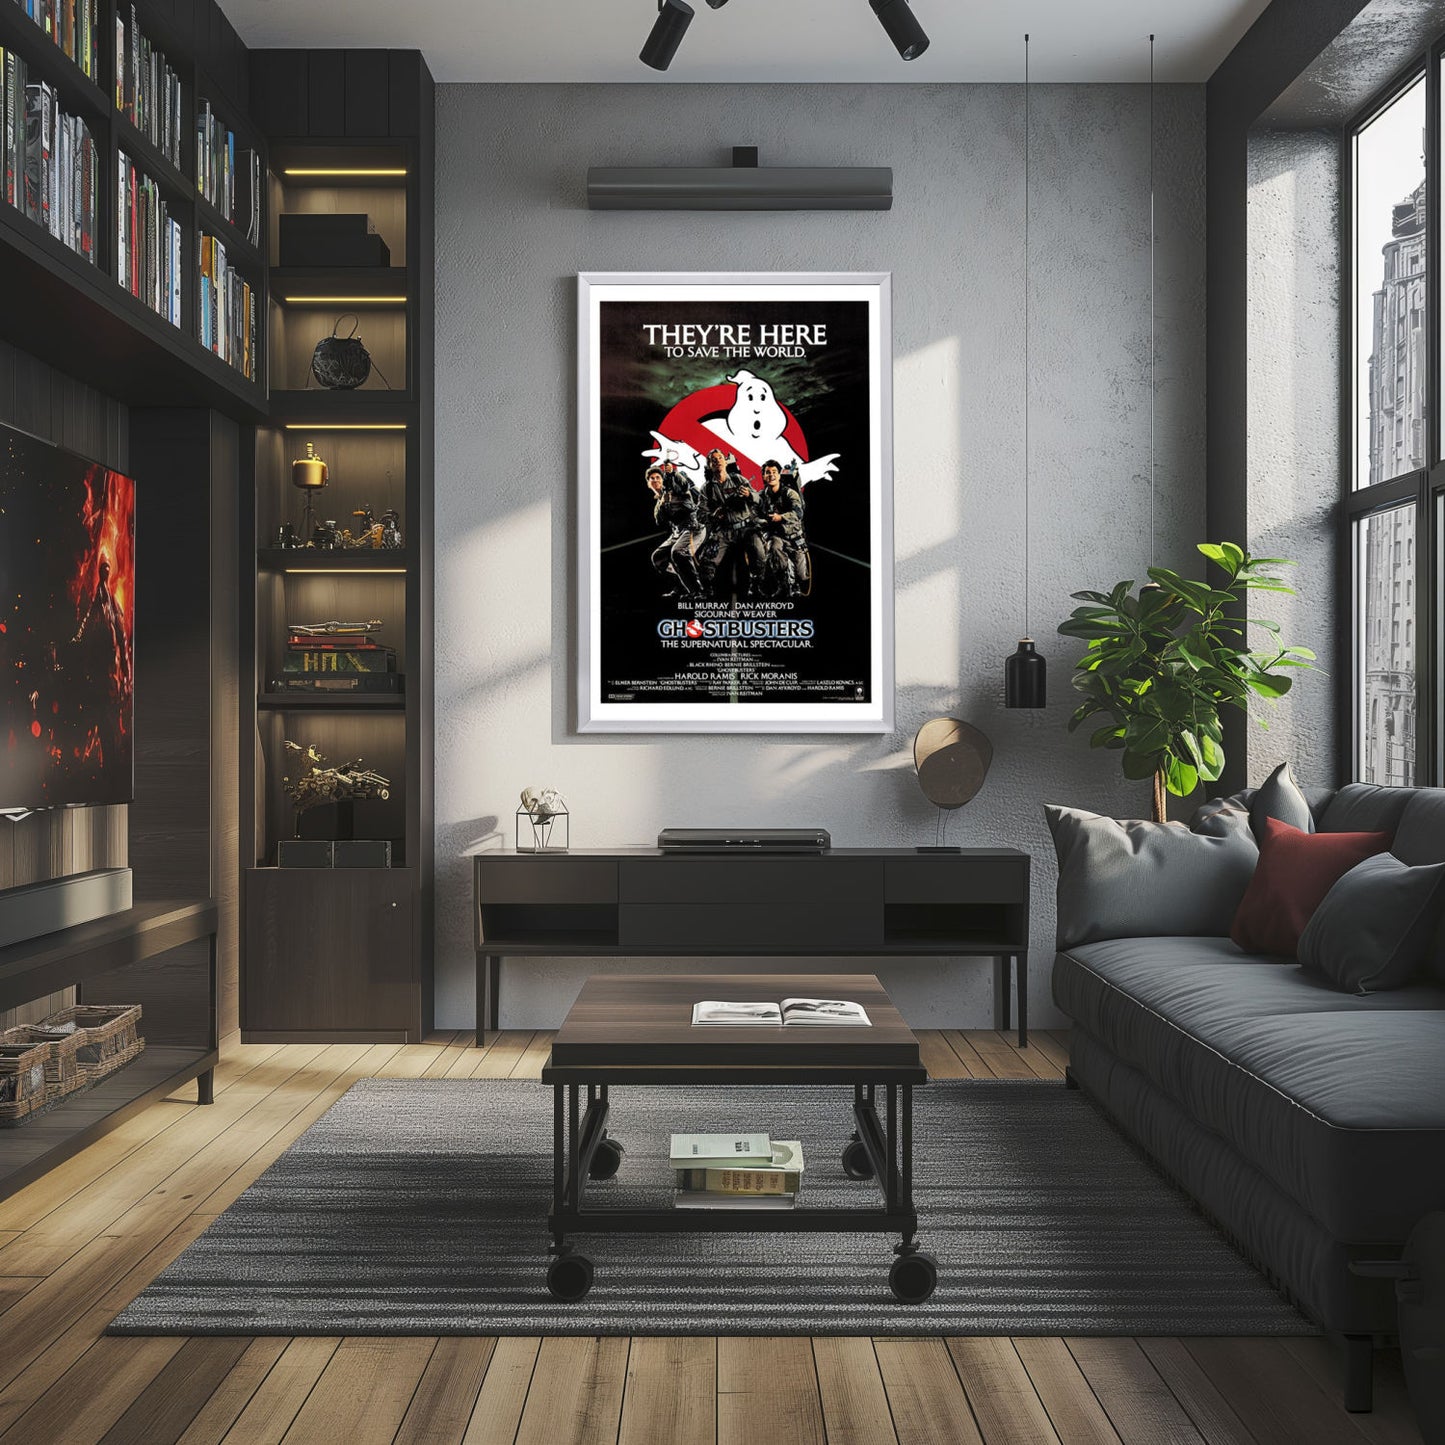 "Ghostbusters" (1984) Framed Movie Poster